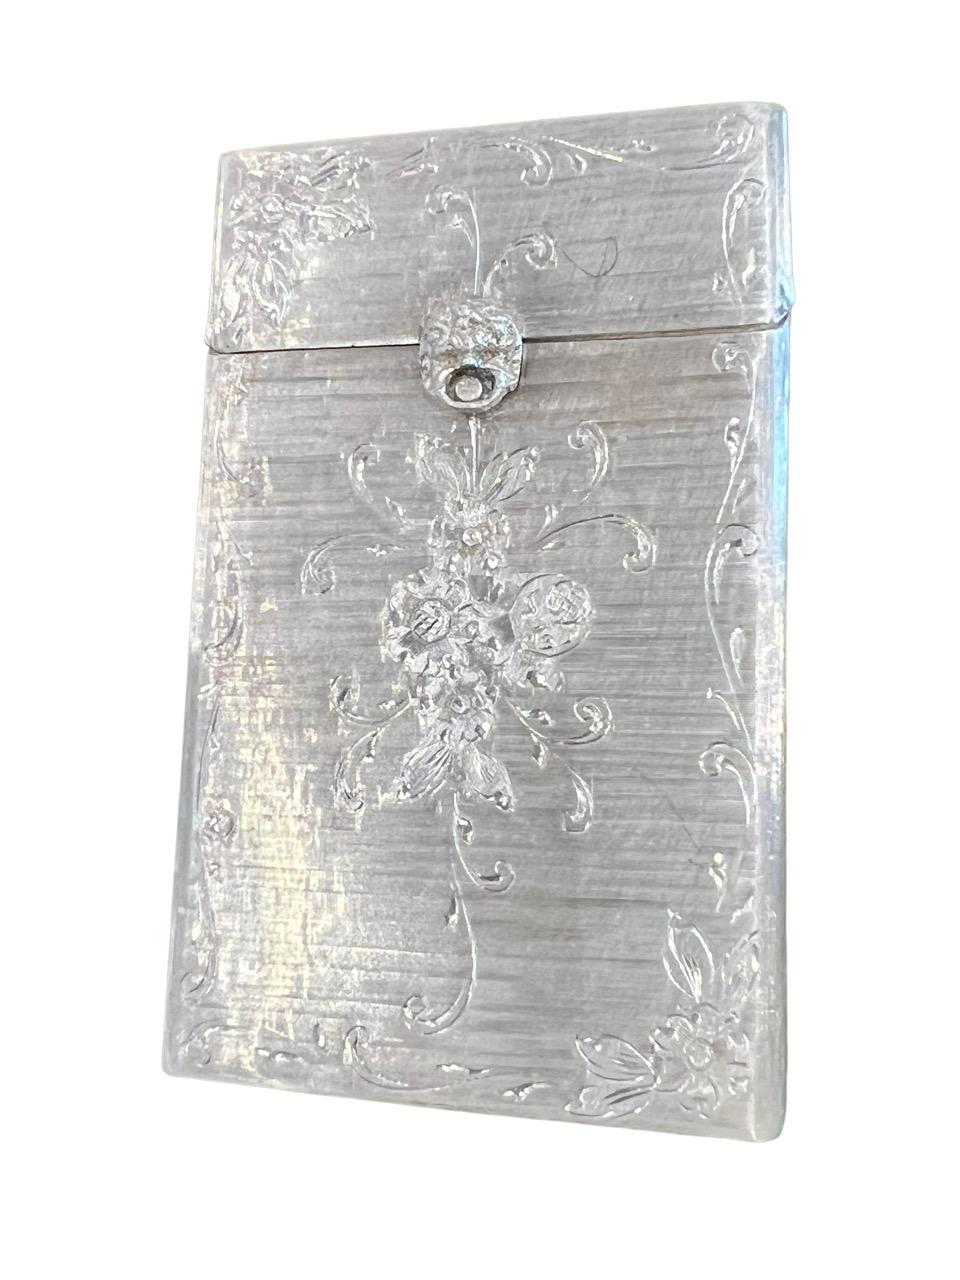 Set of two Sterling Silver Cigarette Cases 19th and 20 Century, Mario Buccellat For Sale 2